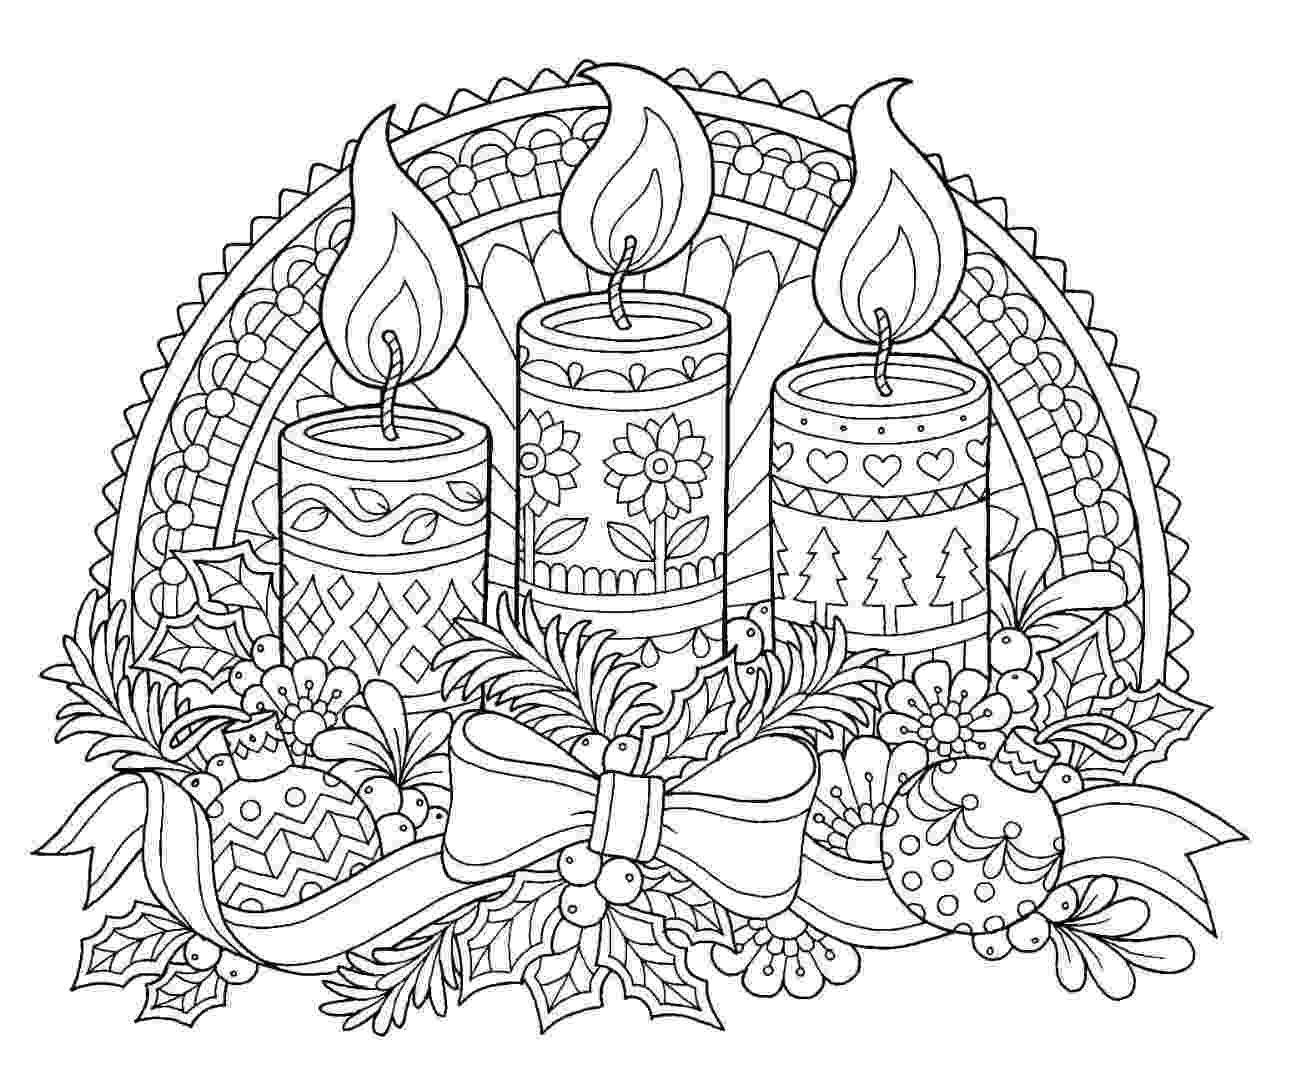 xmas colouring pages for adults christmas coloring page coloring book pages printable pages xmas colouring adults for 